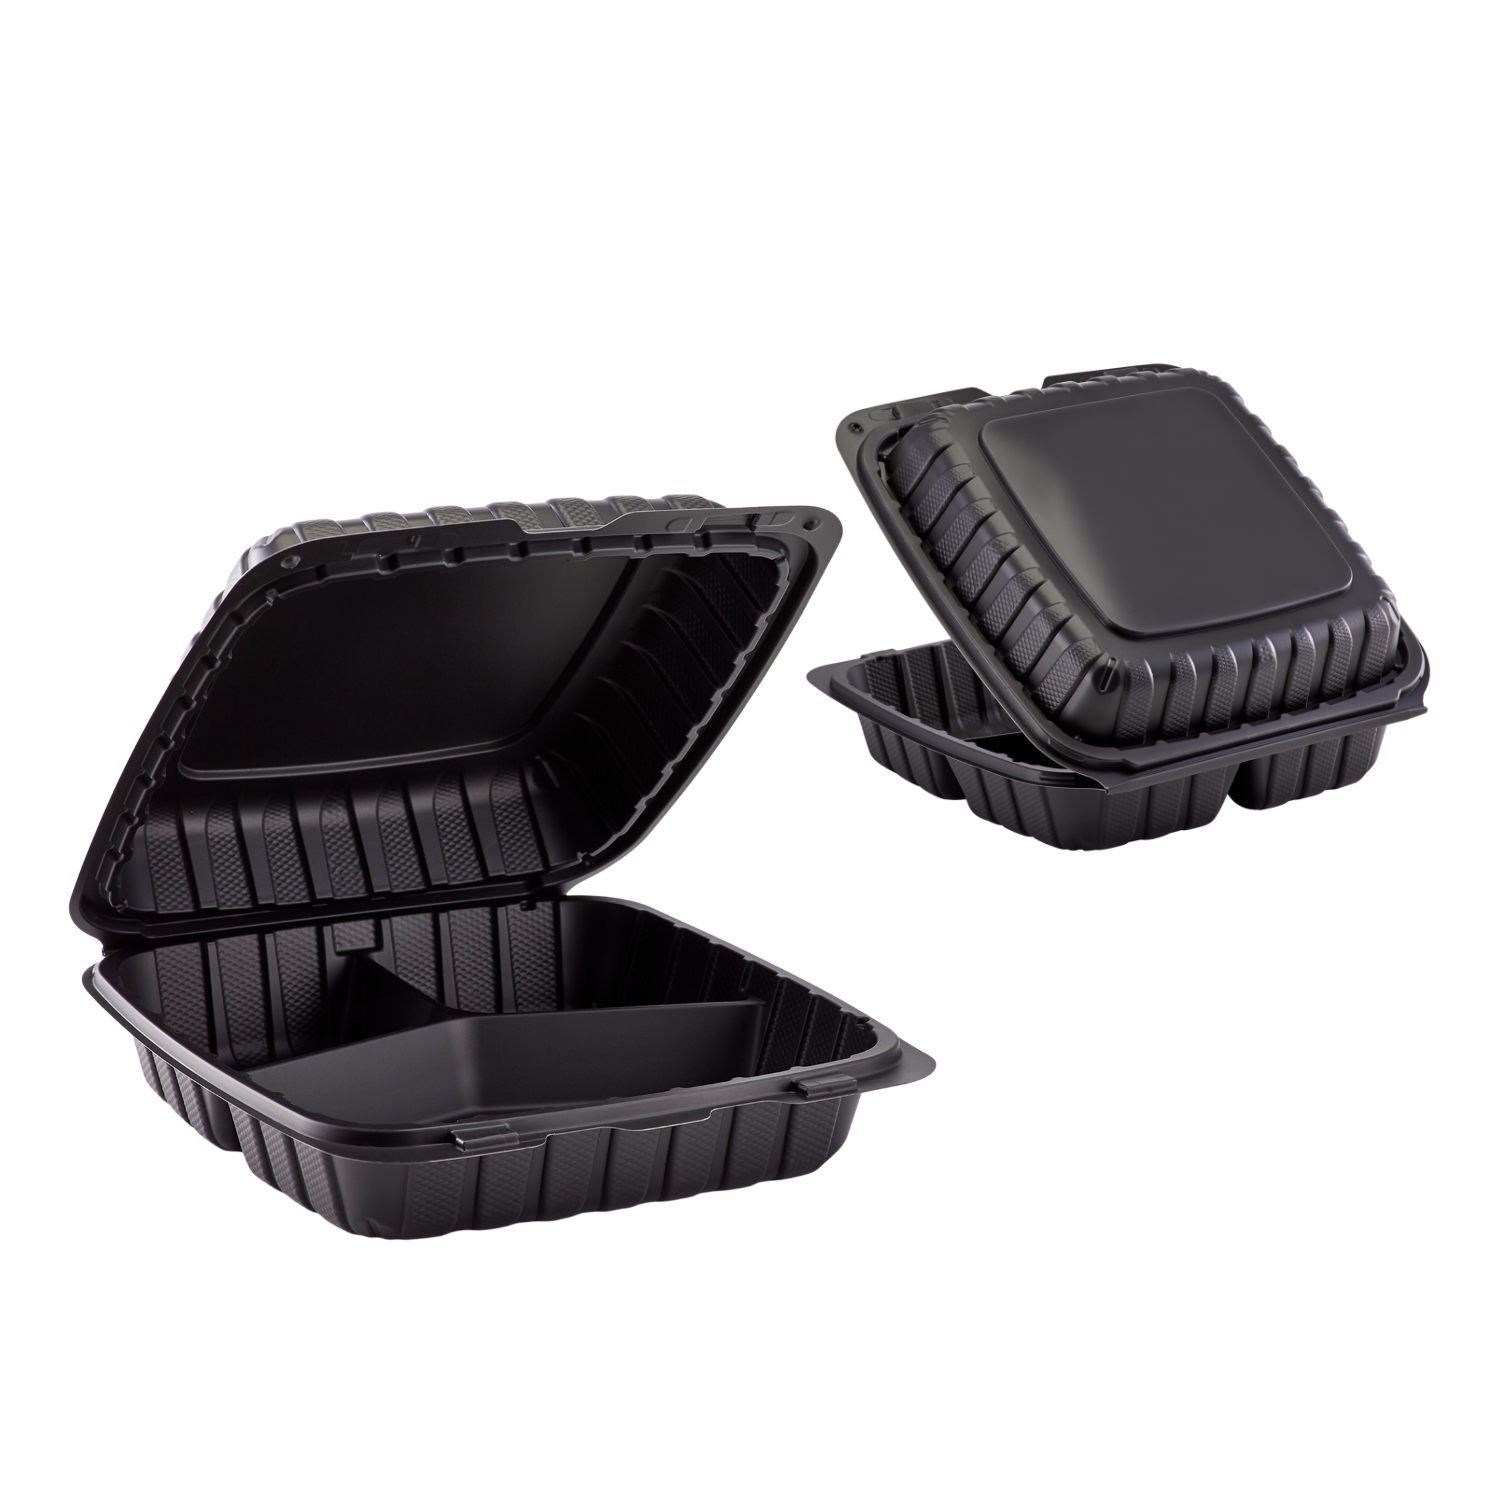 Snackcubes 3 Compartment Take Out Containers- 1056 Pack (261406)